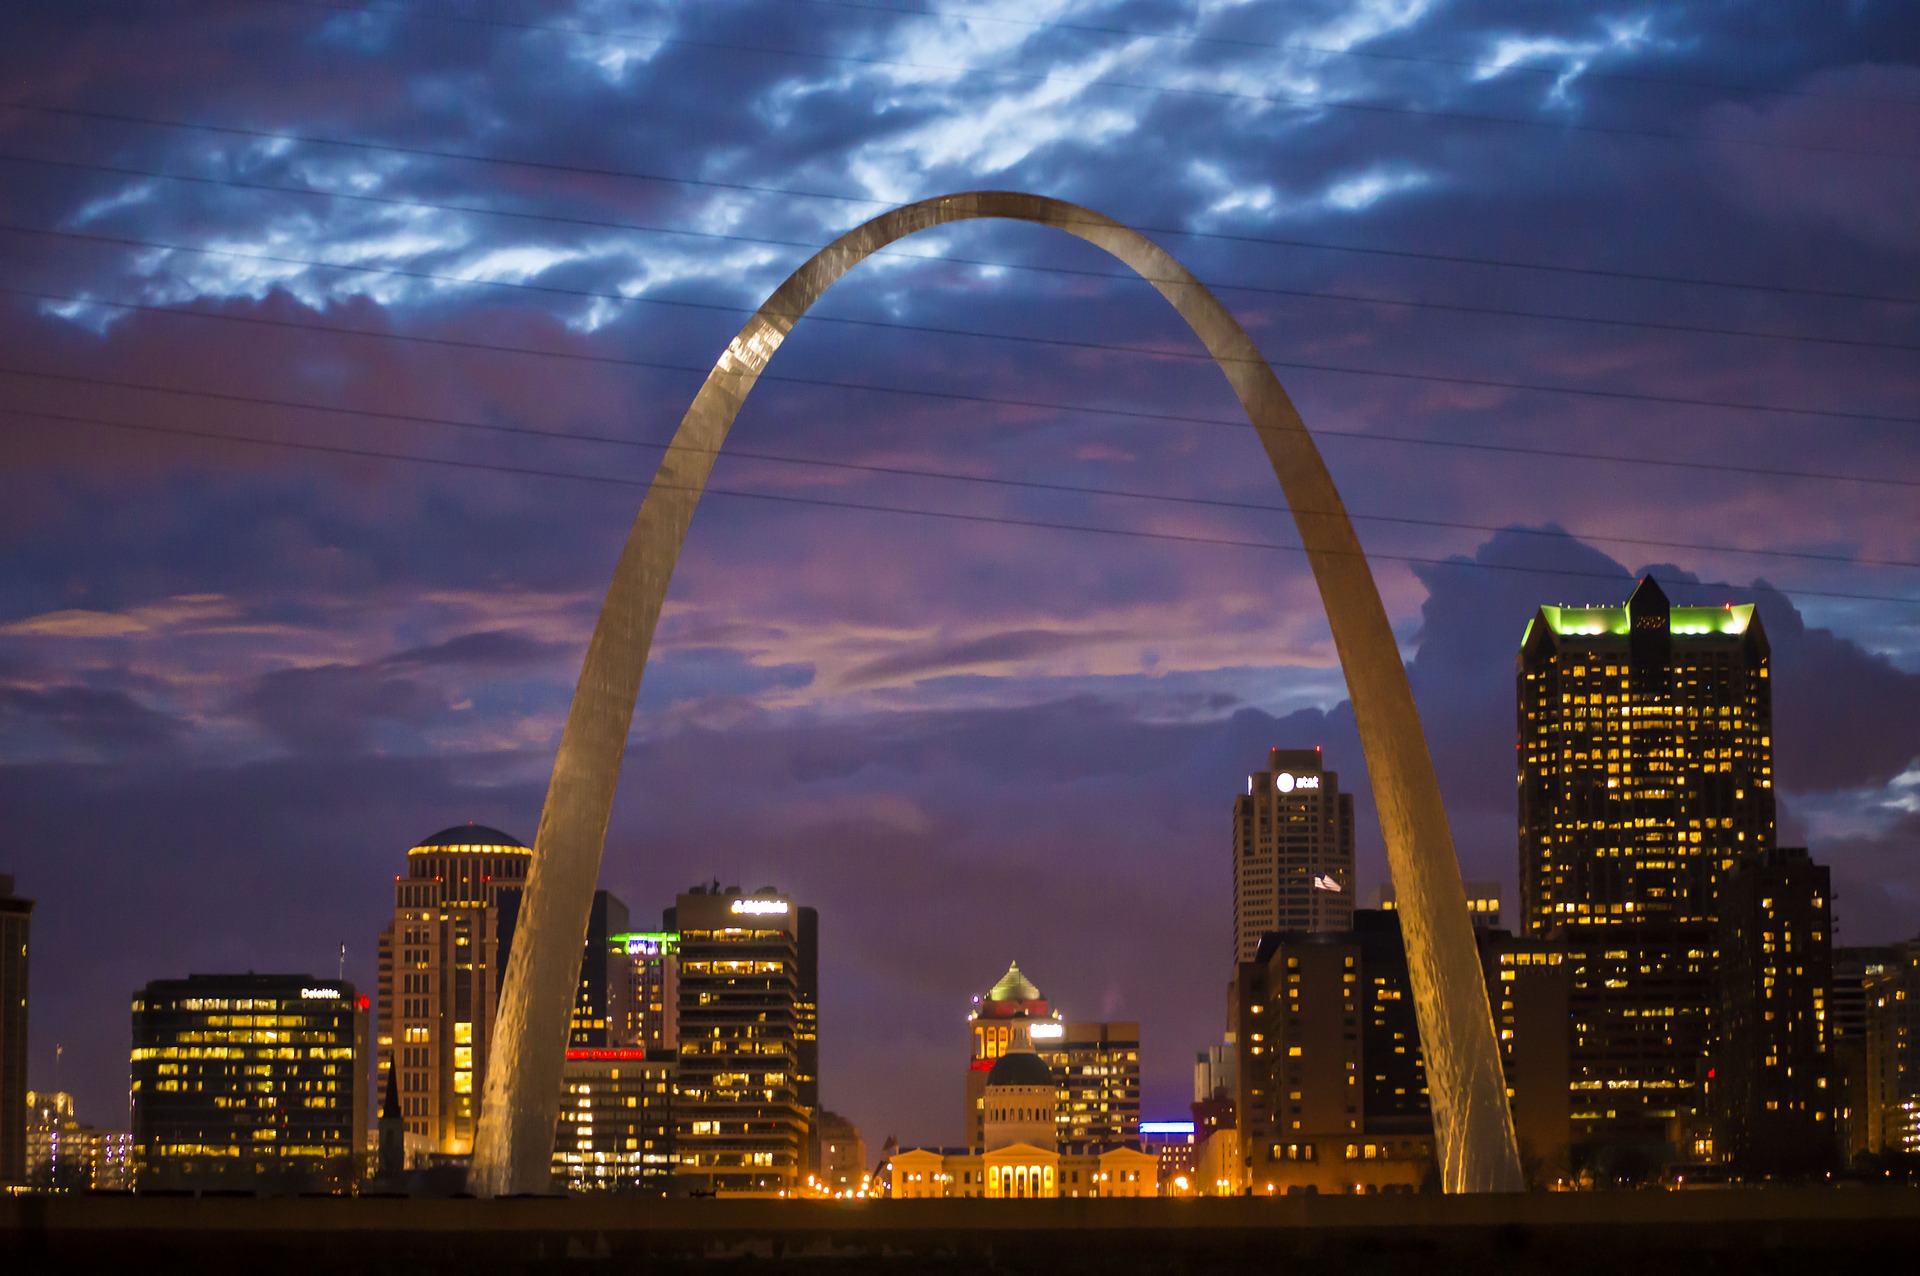 An evening view of the Gateway Arch in St. Louis, Missouri.